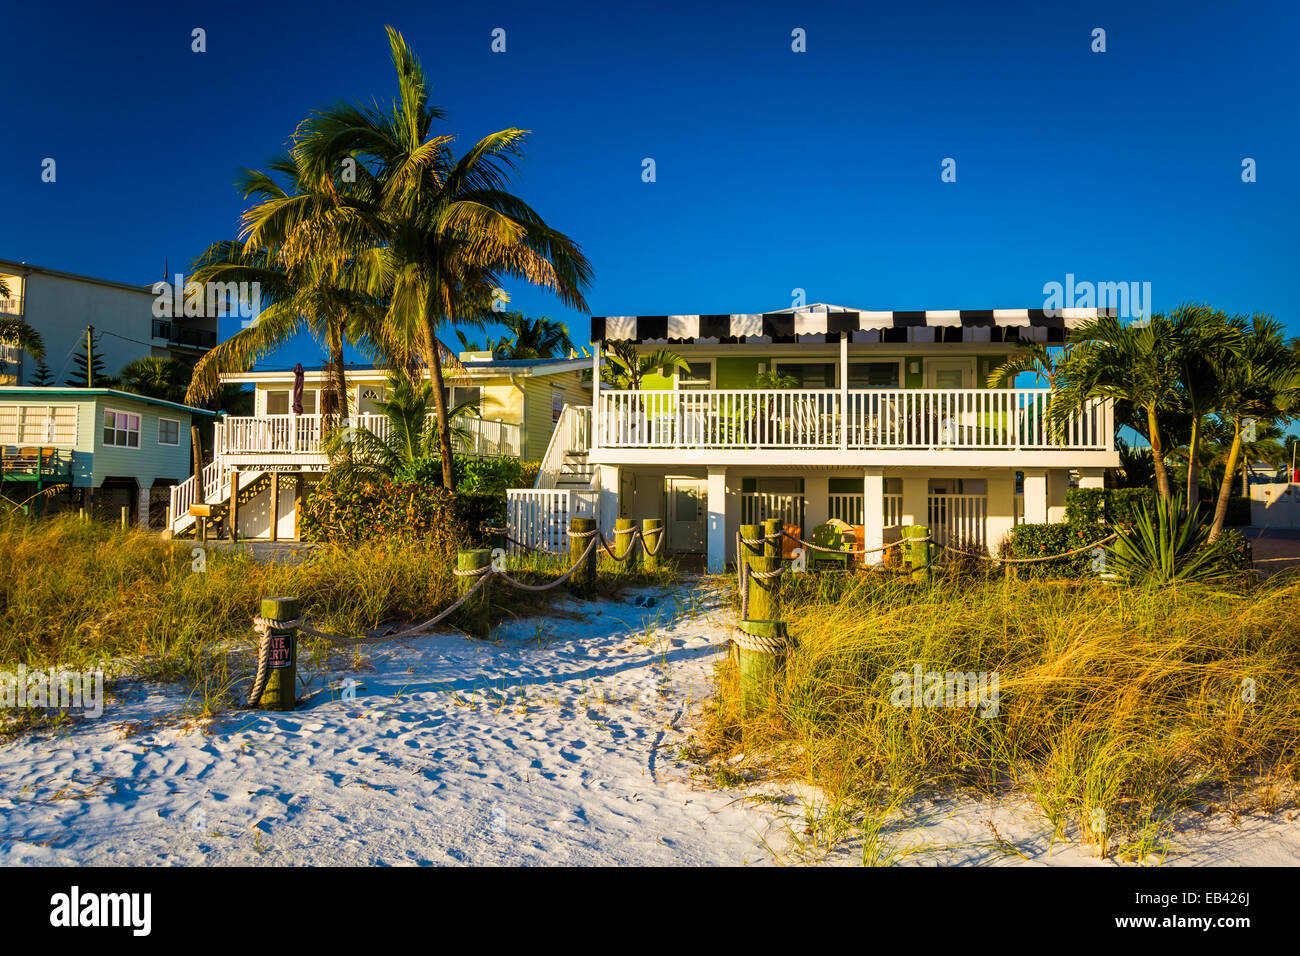 Palm trees and beach houses at Fort Myers Beach, Florida. Stock Photo